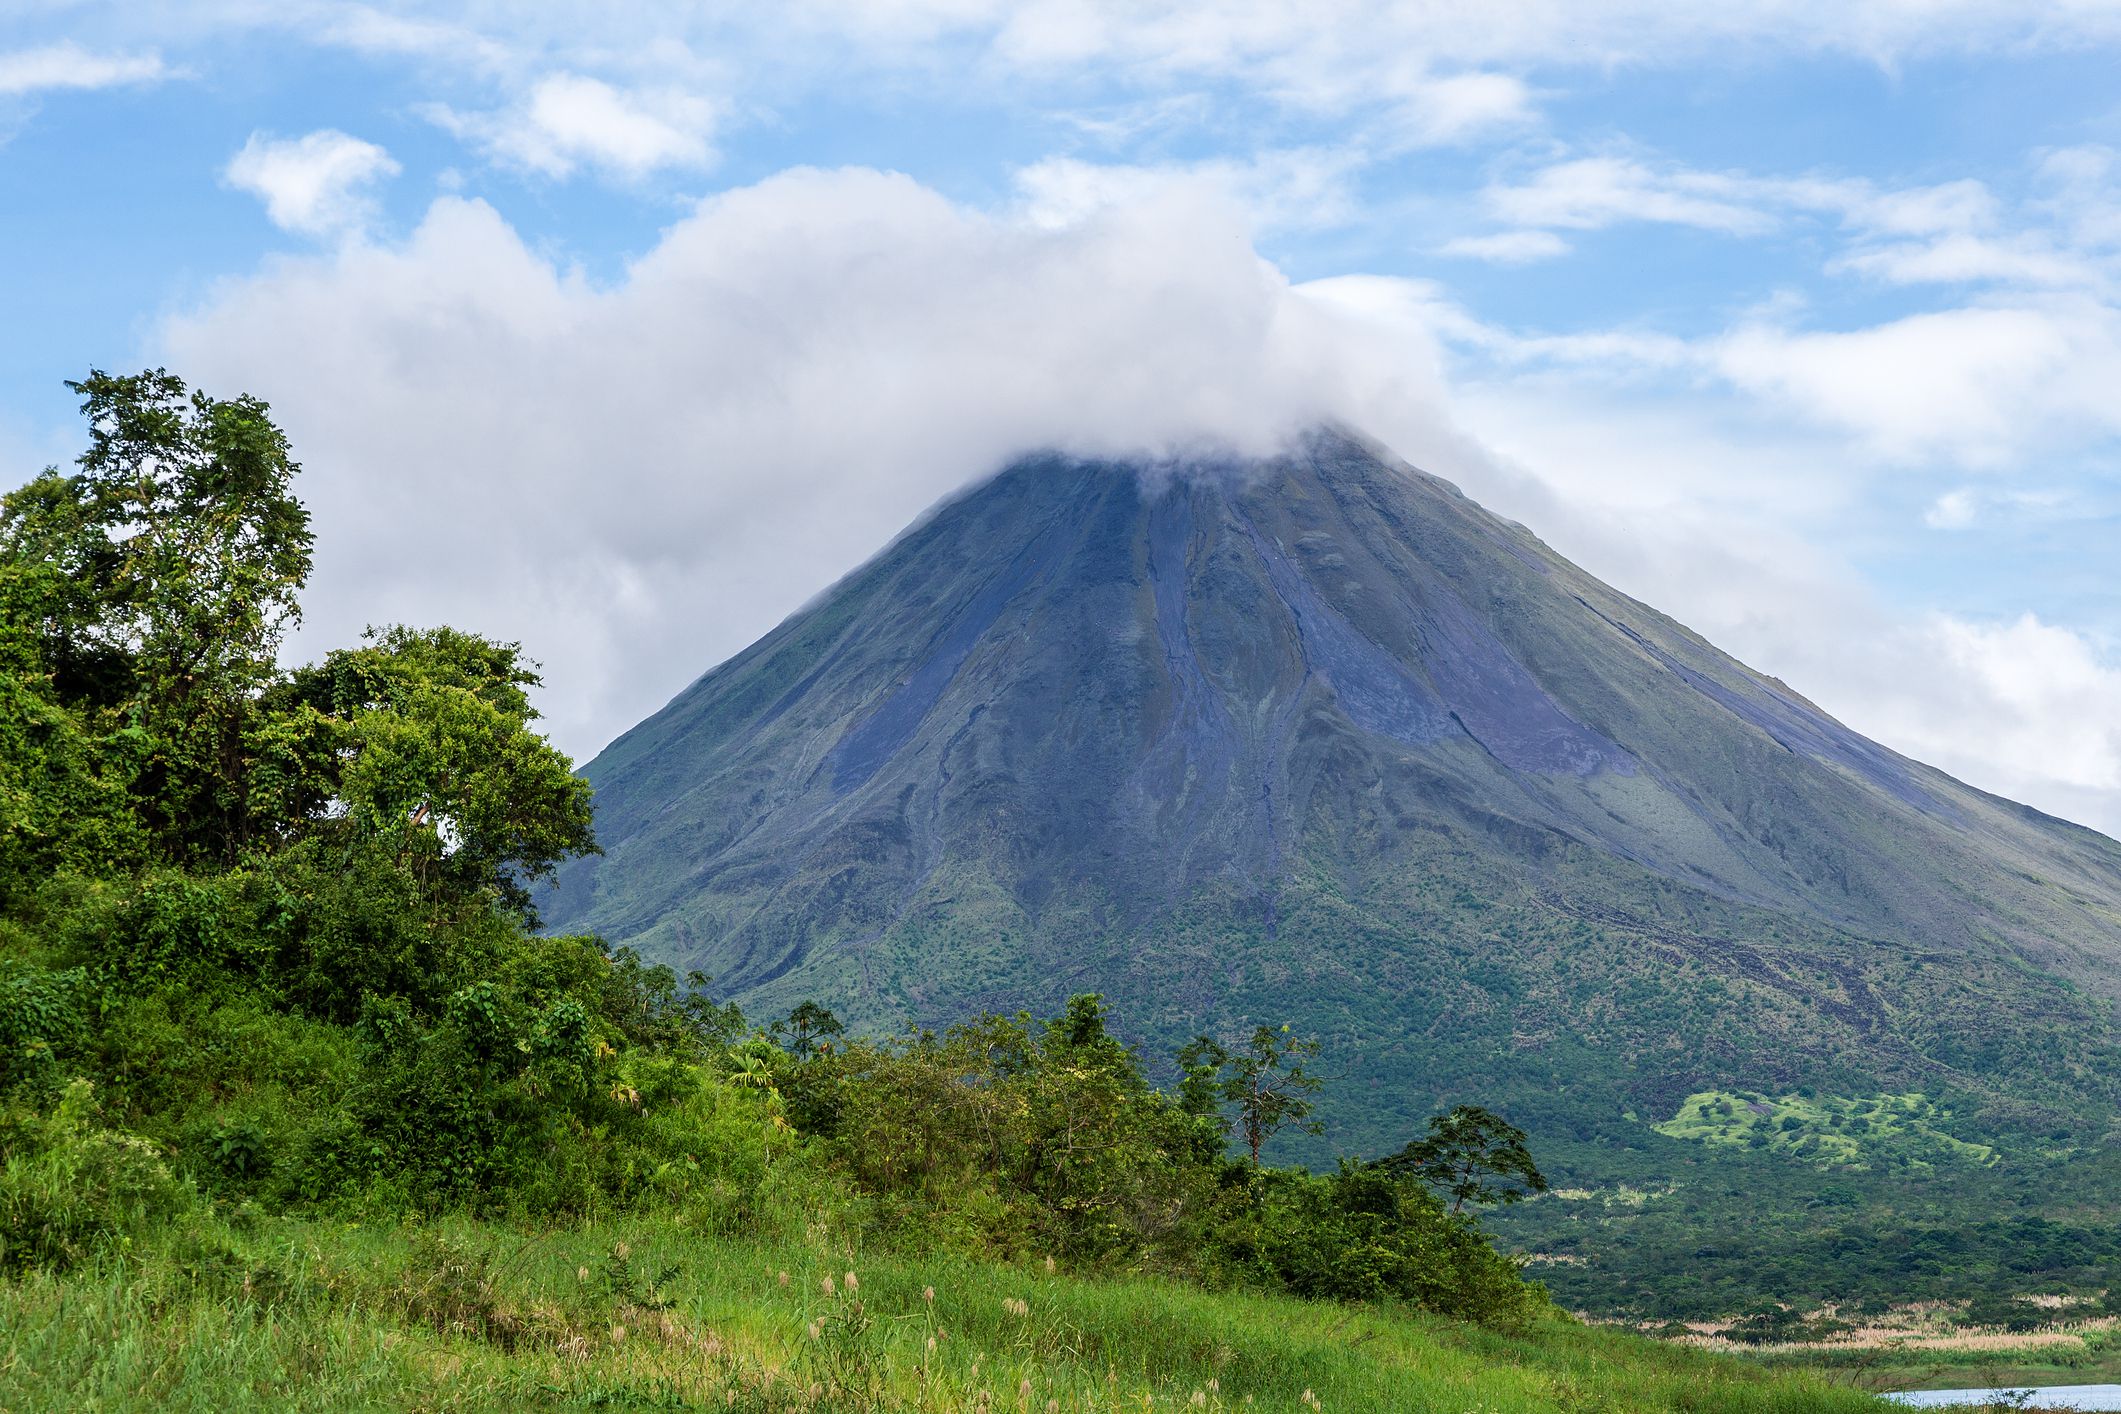 <p>Located near La Fortuna, Arenal Volcano is an active volcano in Costa Rica. While it hasn’t had a major eruption since 1968, it still has frequent, minor eruptions that visitors can safely view and appreciate. Because of this, it’s one of the most unique things to do in Costa Rica.</p><p>Visitors should also consider spending time in the town of La Fortuna. While it provides great views of Arenal Volcano, there are also numerous restaurants and attractions to explore.</p>